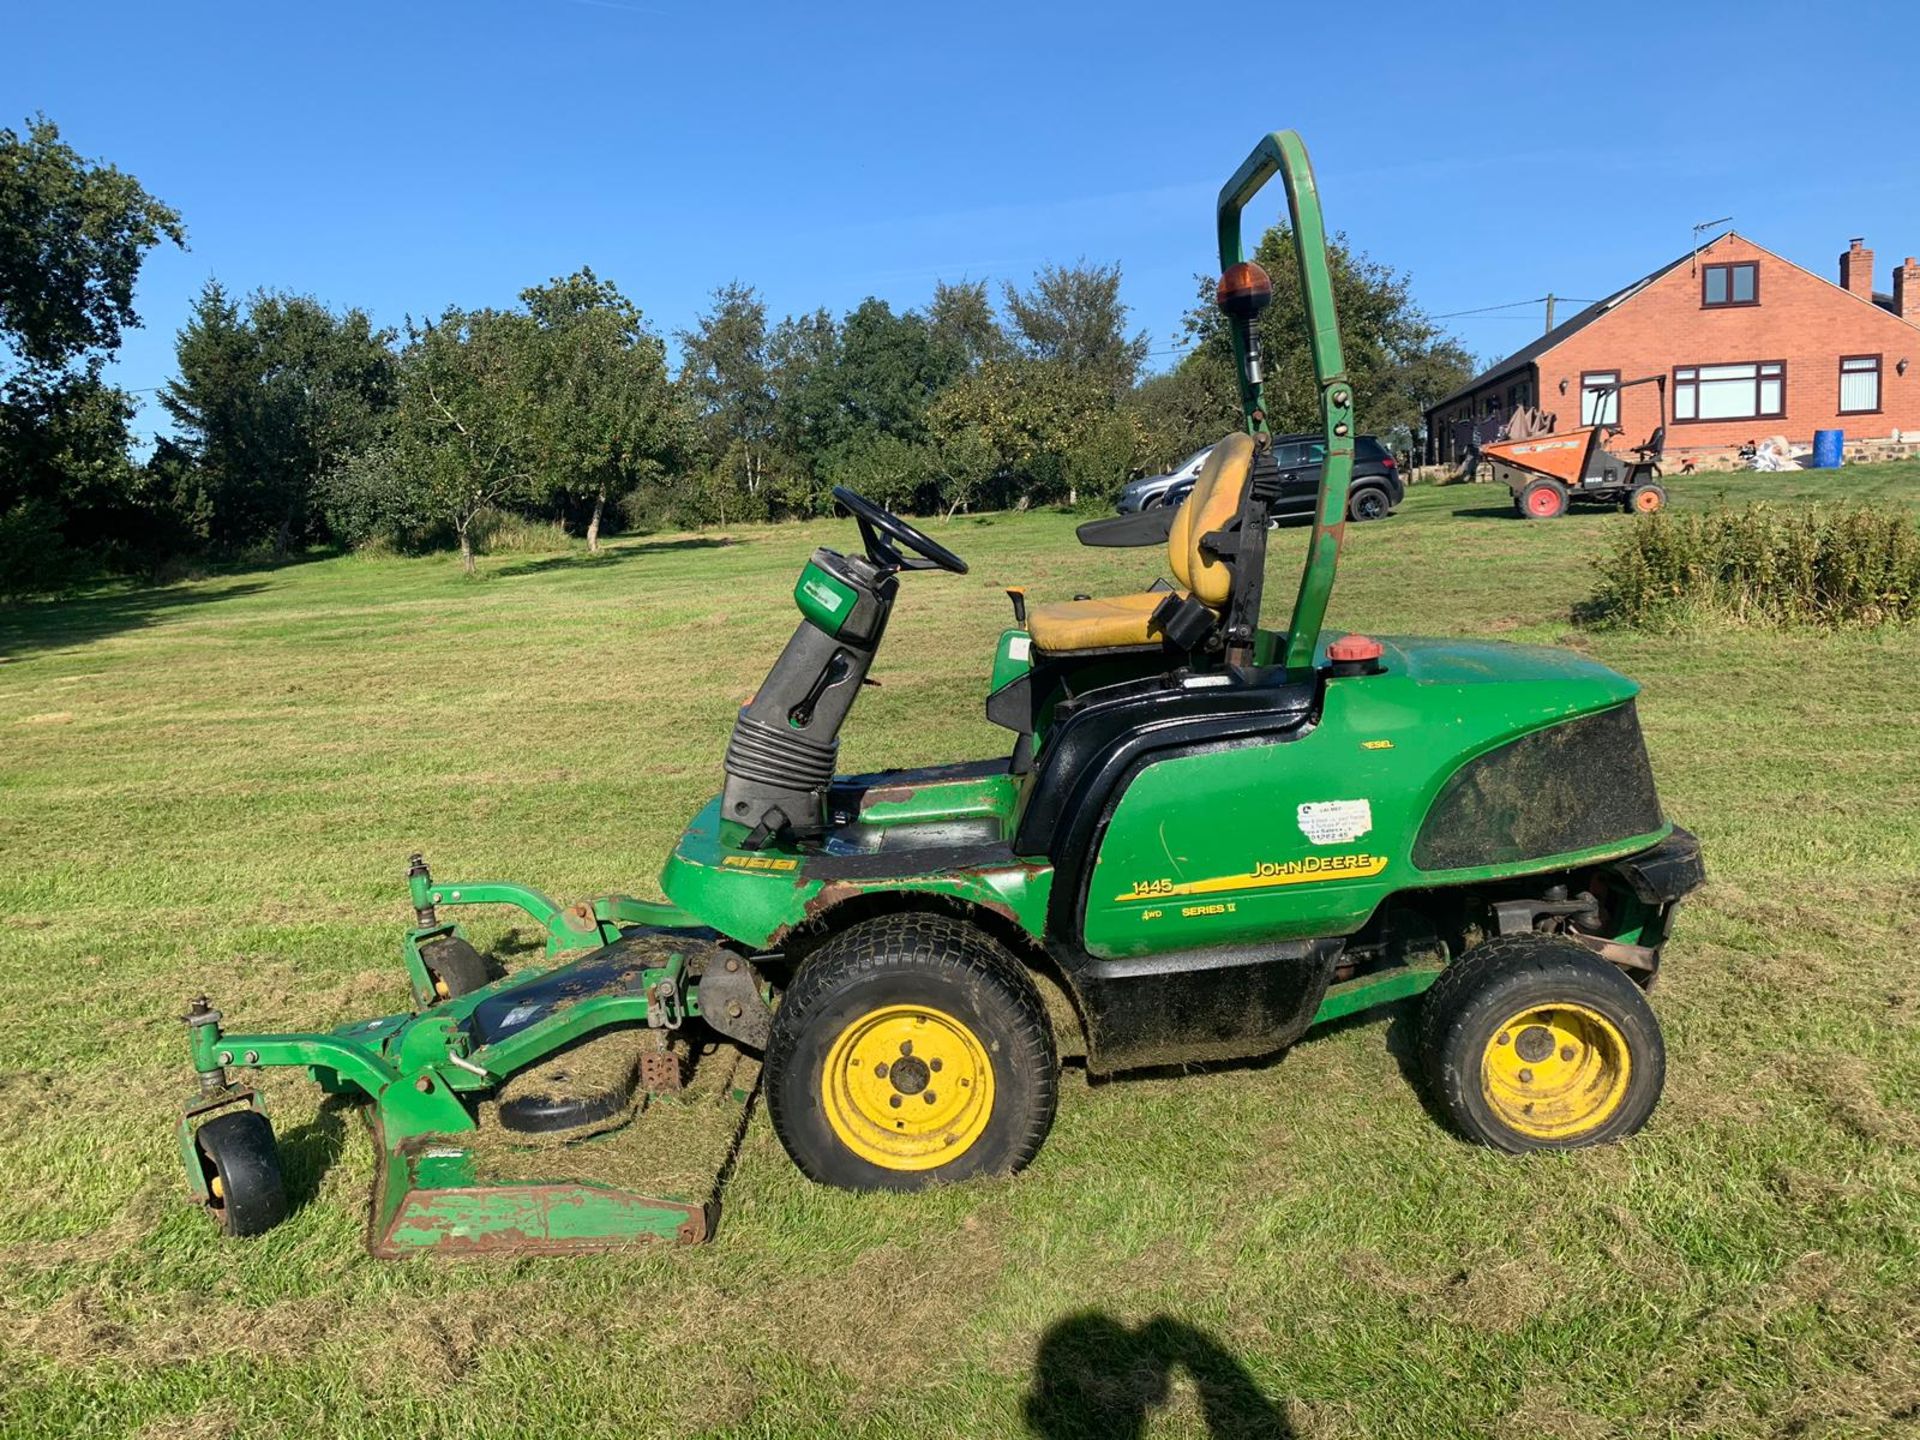 JOHN DEERE 1445 SERIES II 4WD RIDE ON DIESEL LAWN MOWER C/W OUT-FRONT ROTARY CUTTING DECK *PLUS VAT* - Image 5 of 14